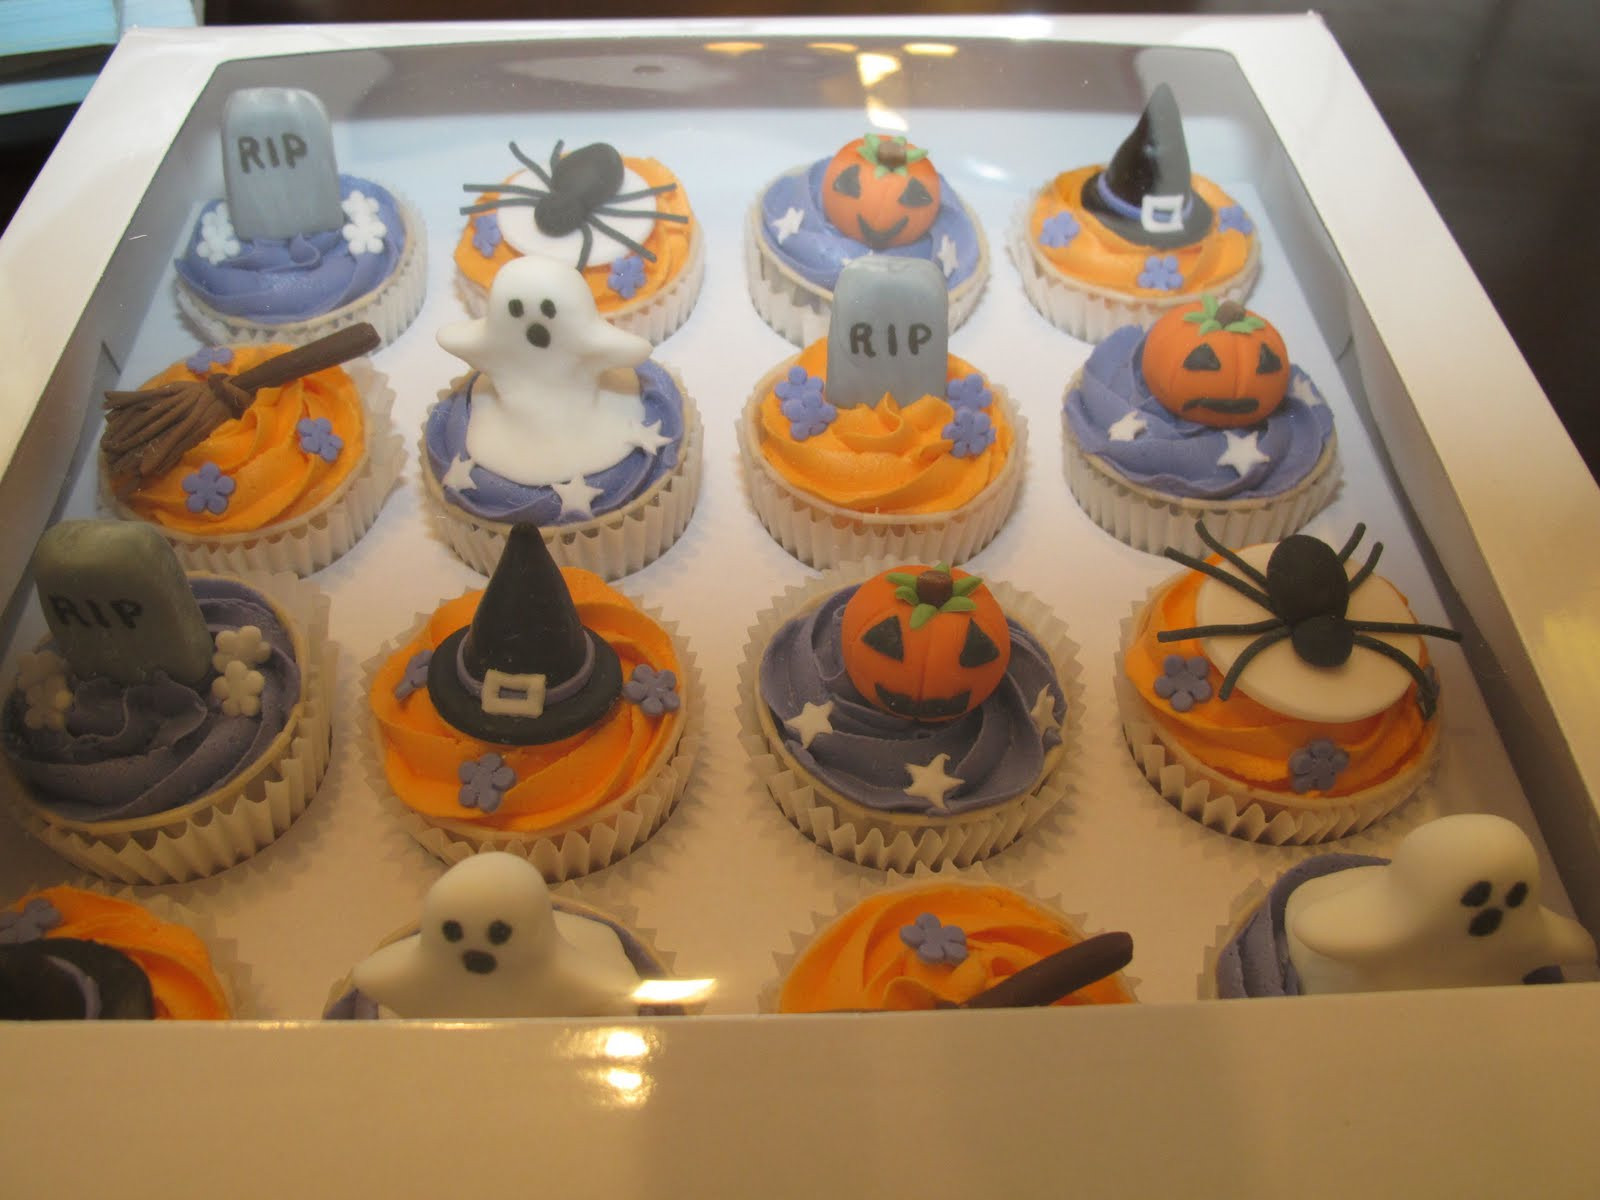 Halloween Cakes And Cupcakes
 Pink Oven Cakes and Cookies Halloween cupcake ideas